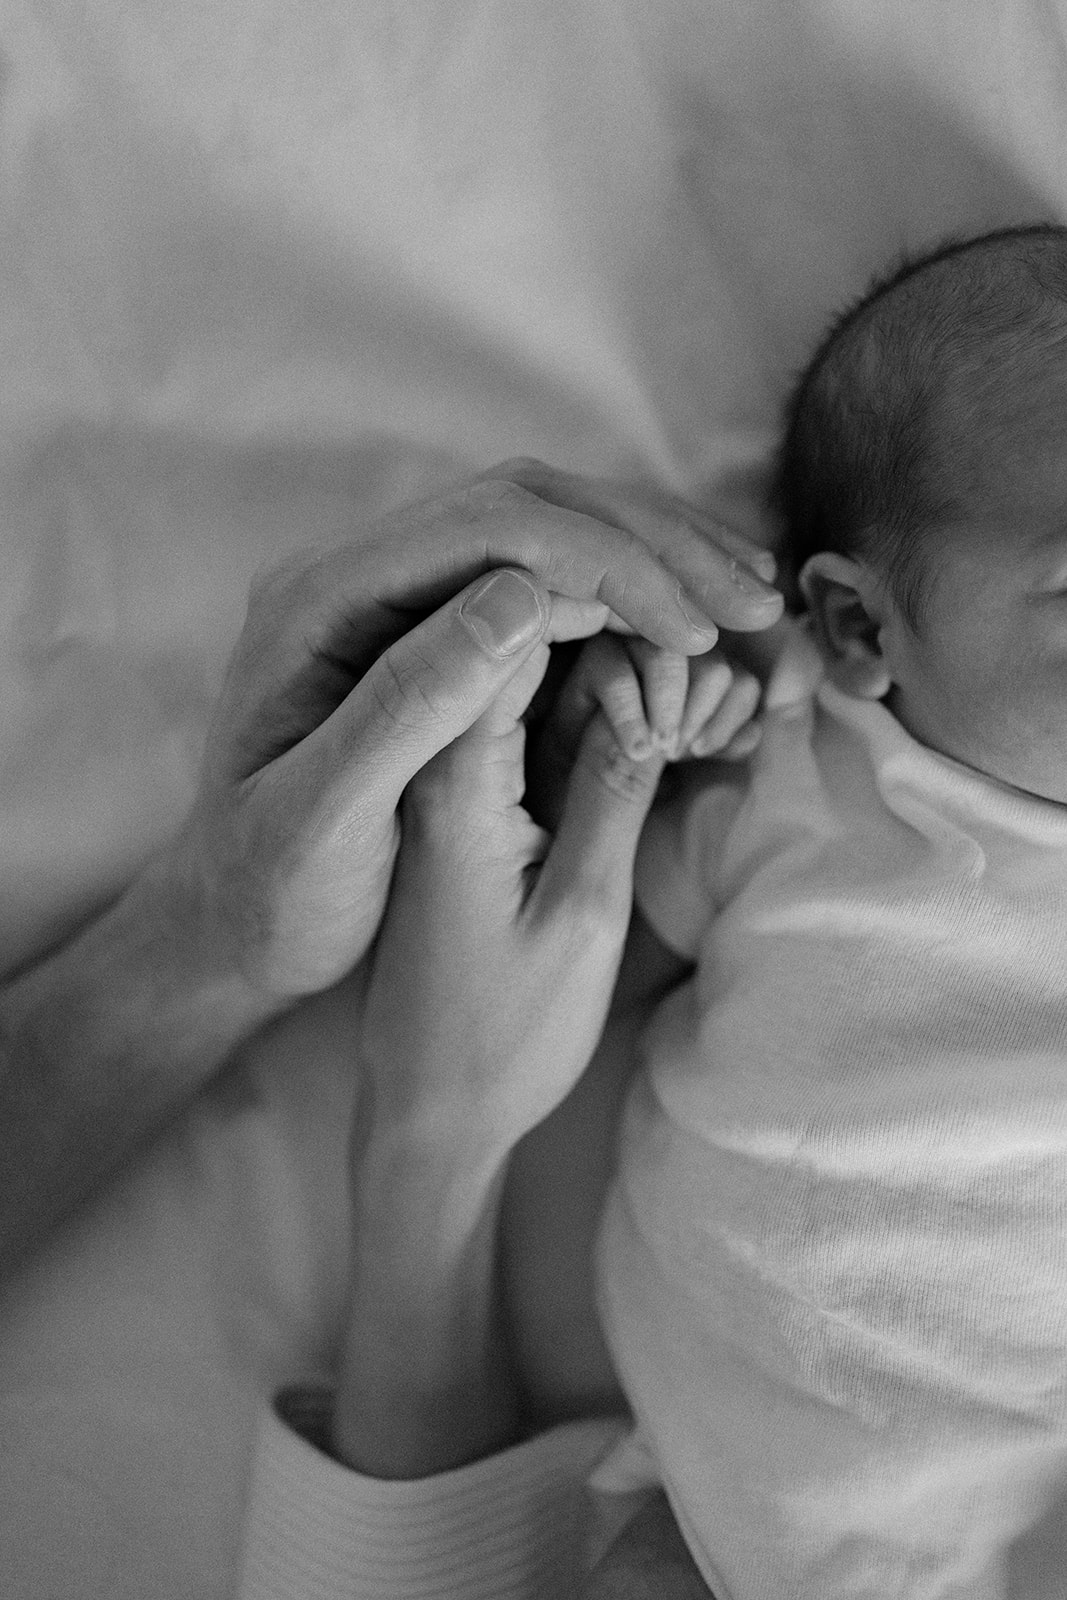 a baby's hand encompassed in mothers and fathers hand.